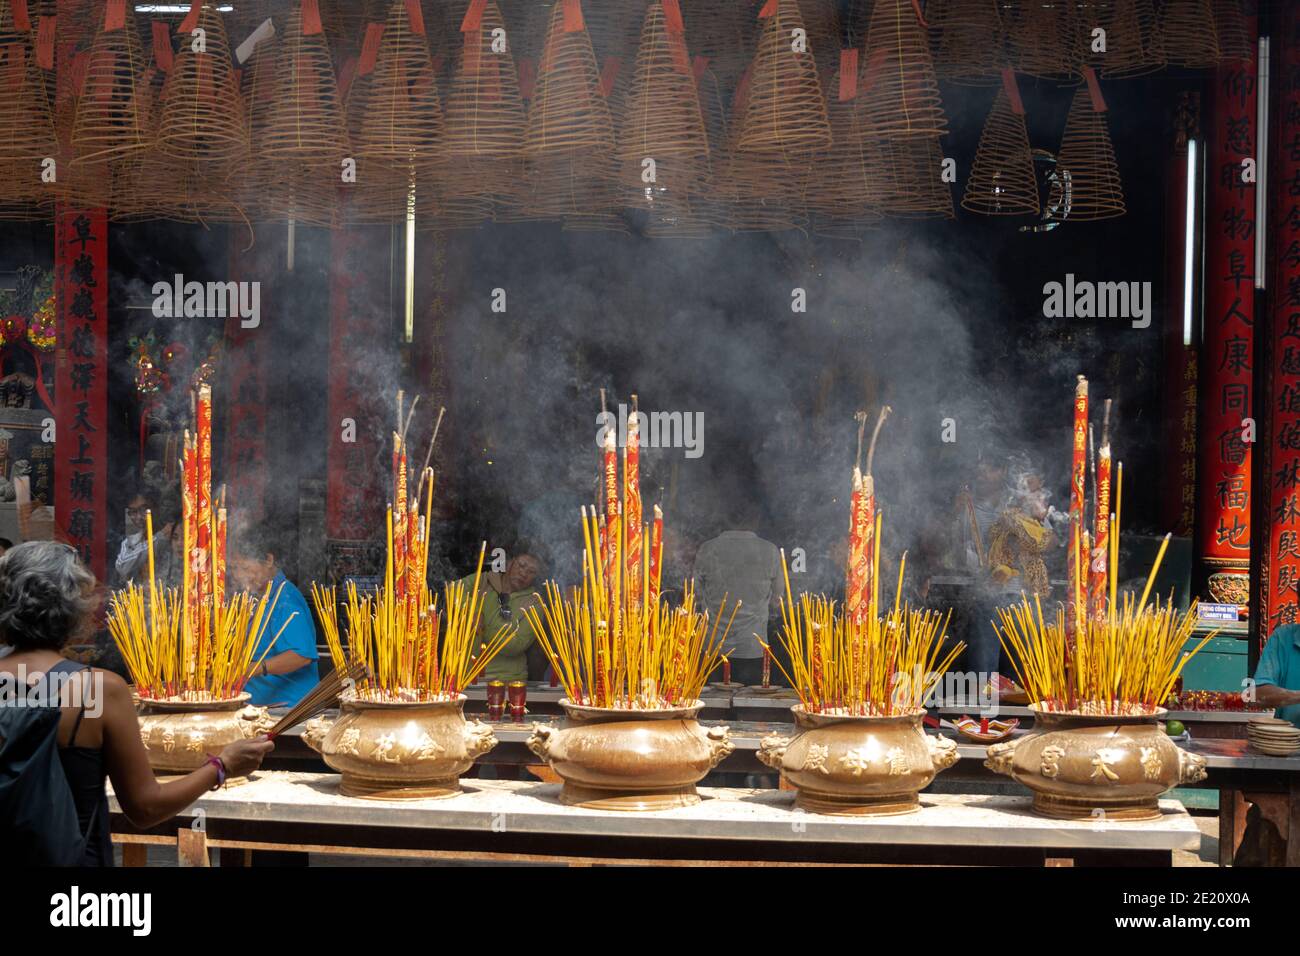 Incense burning in large pots in a Buddhist temple in Vietnam Stock Photo